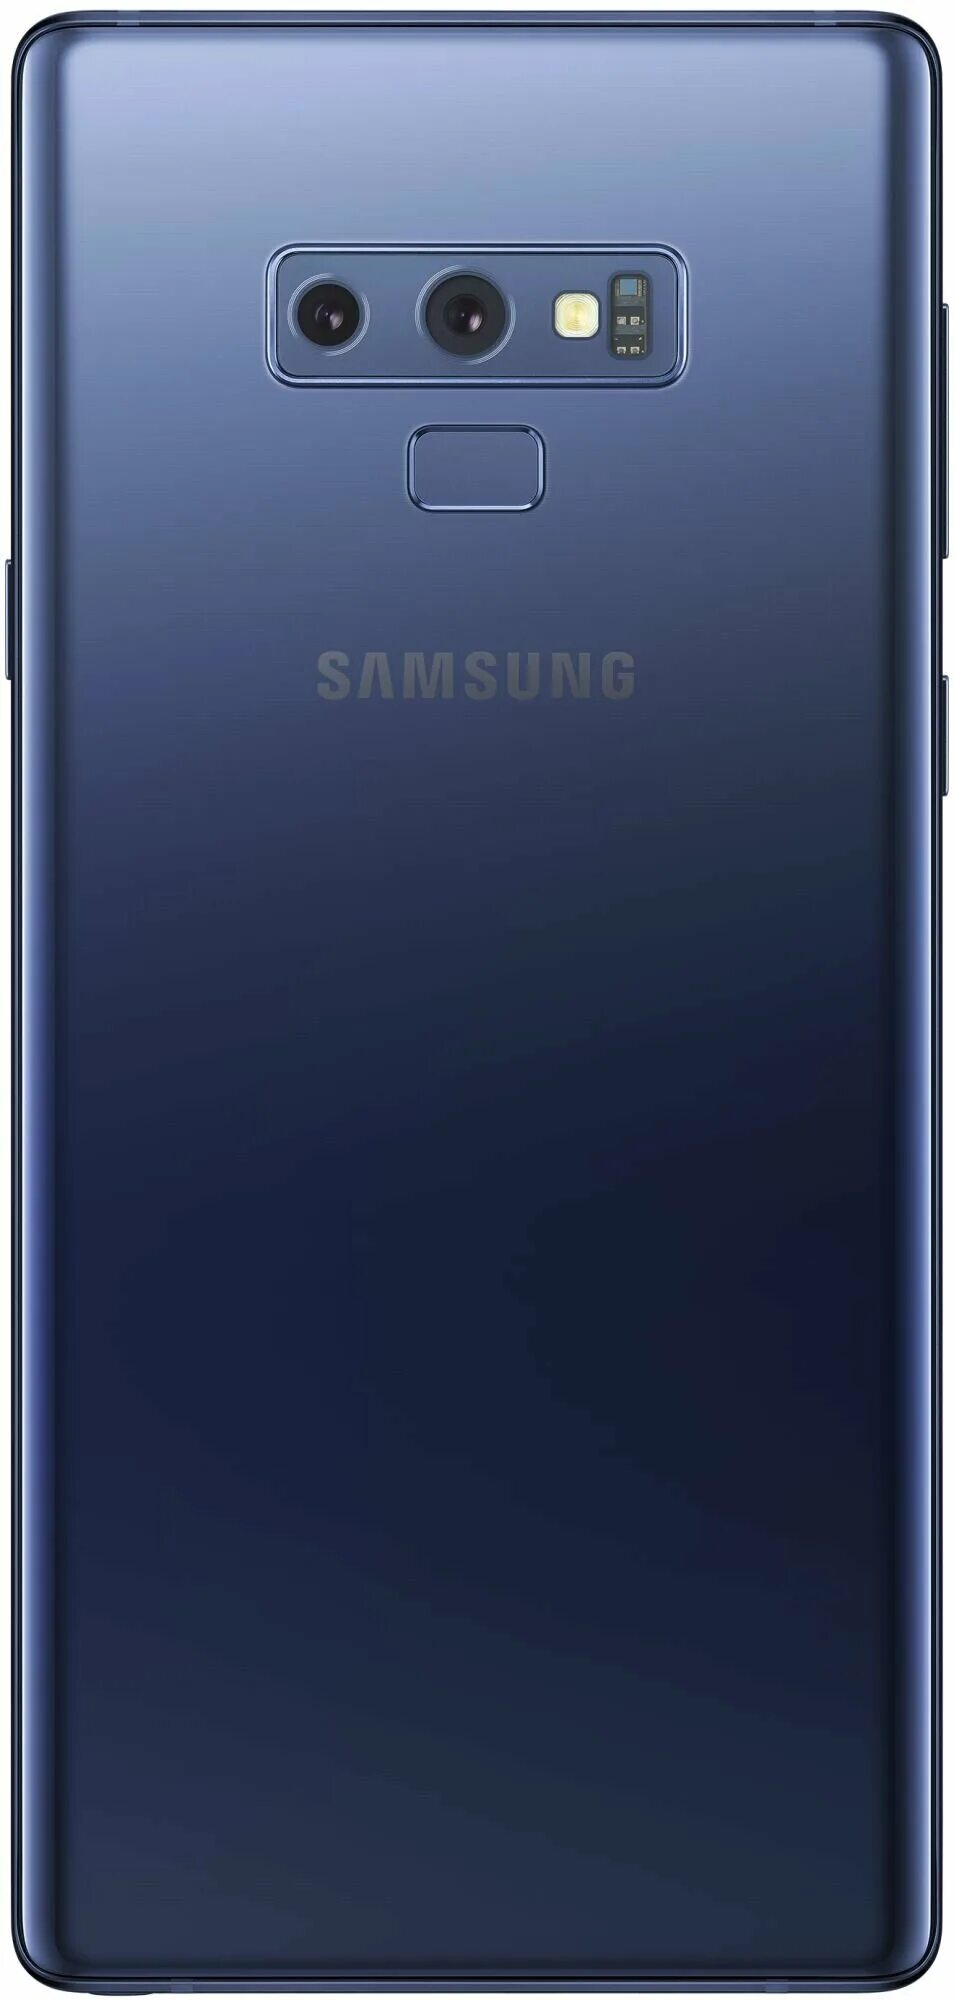 Samsung Galaxy s9 Note. Samsung Galaxy Note 9. Samsung Galaxy Note 9 6/128. Смартфон Samsung Galaxy Note 9 128gb.